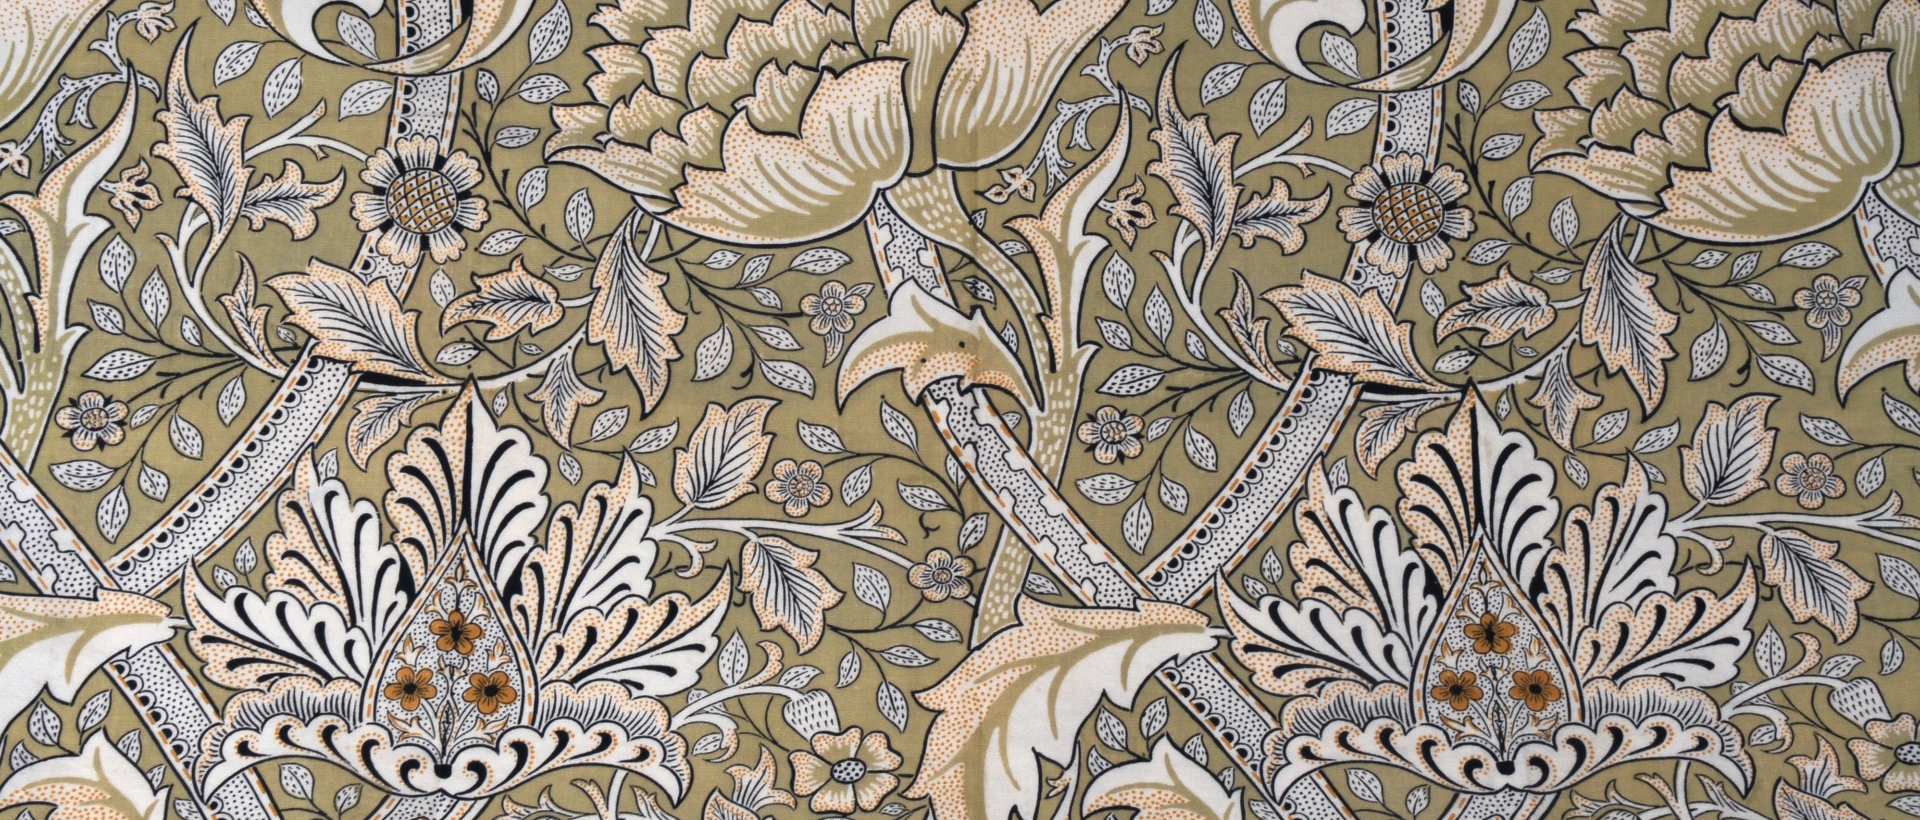 Windrush pattern by William Morris. On printed cotton.